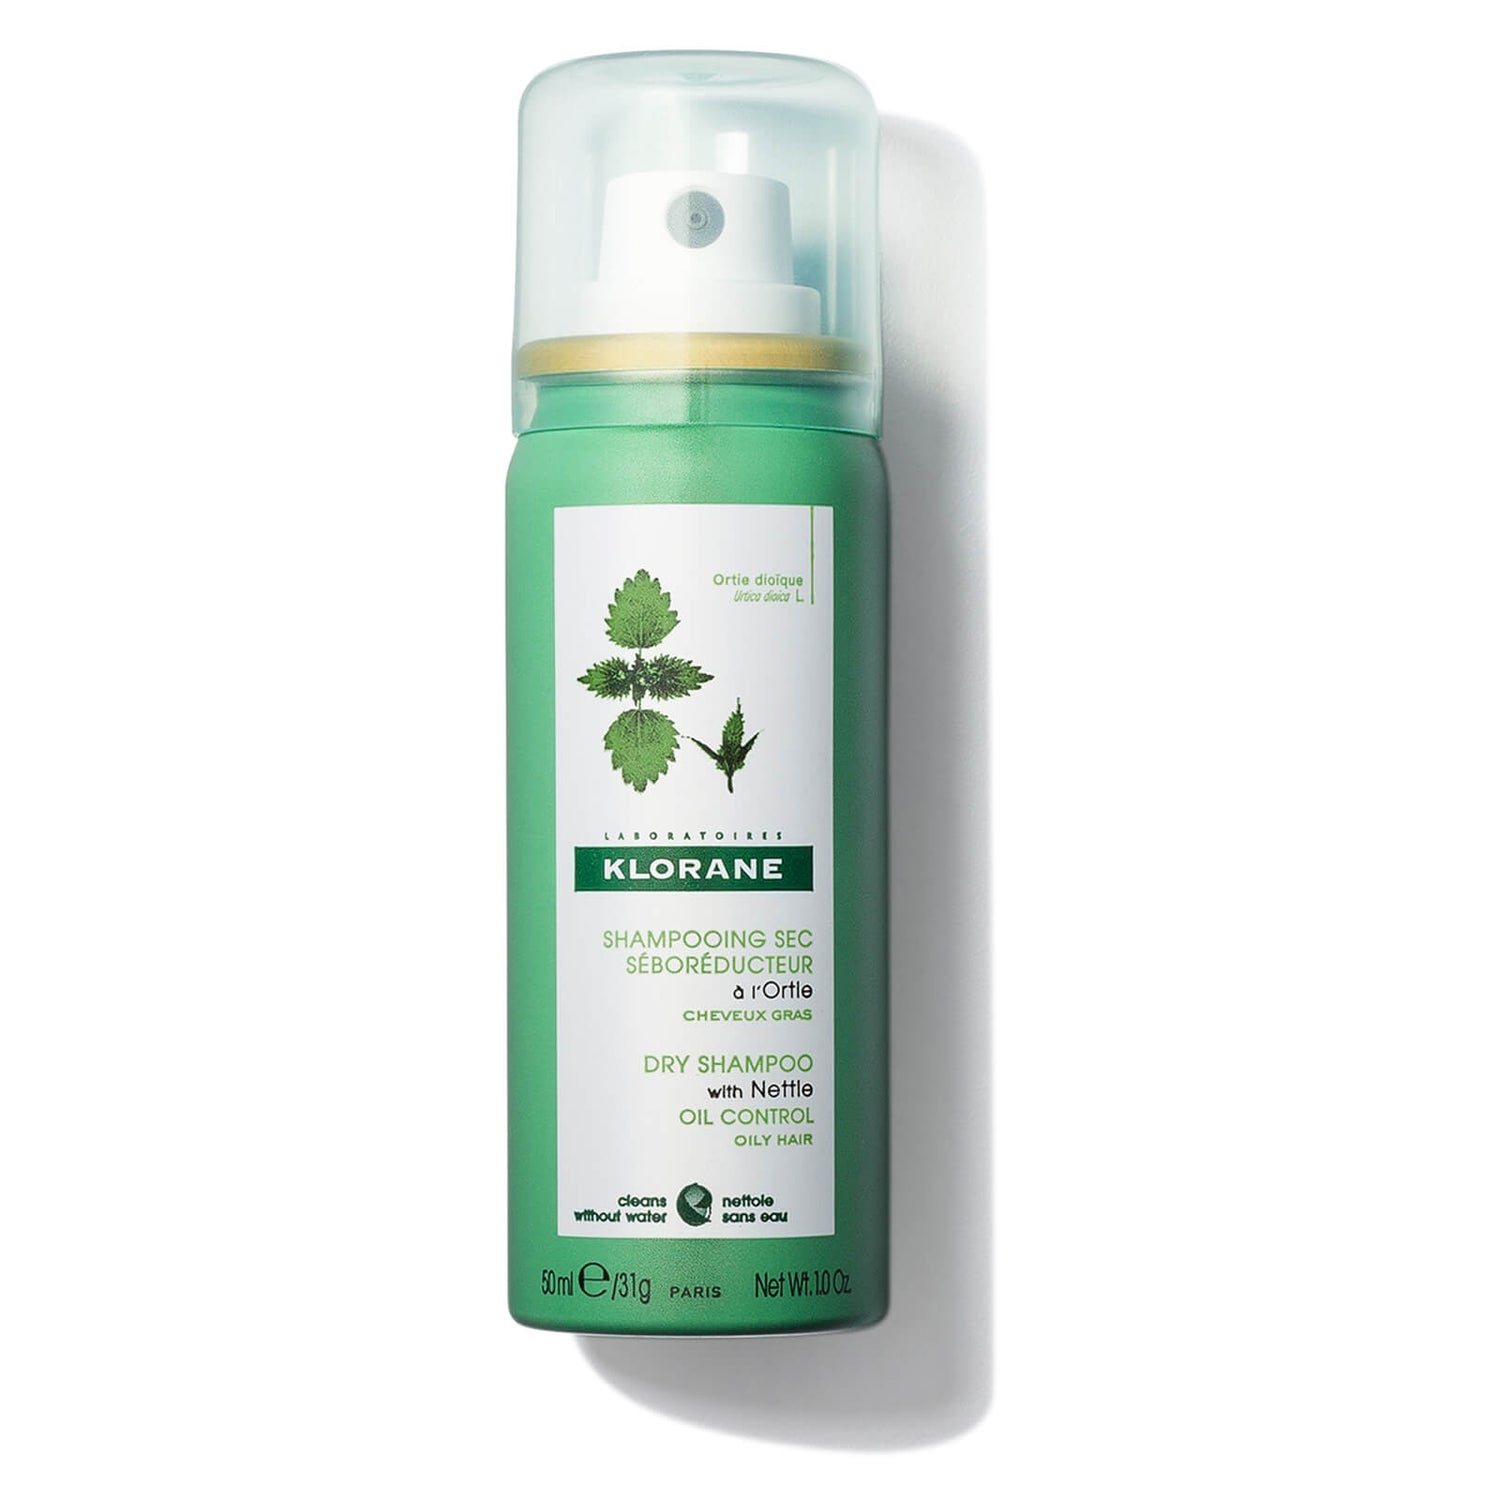 Klorane Dry Shampoo with Nettle Travel Size - Oil Control 1oz